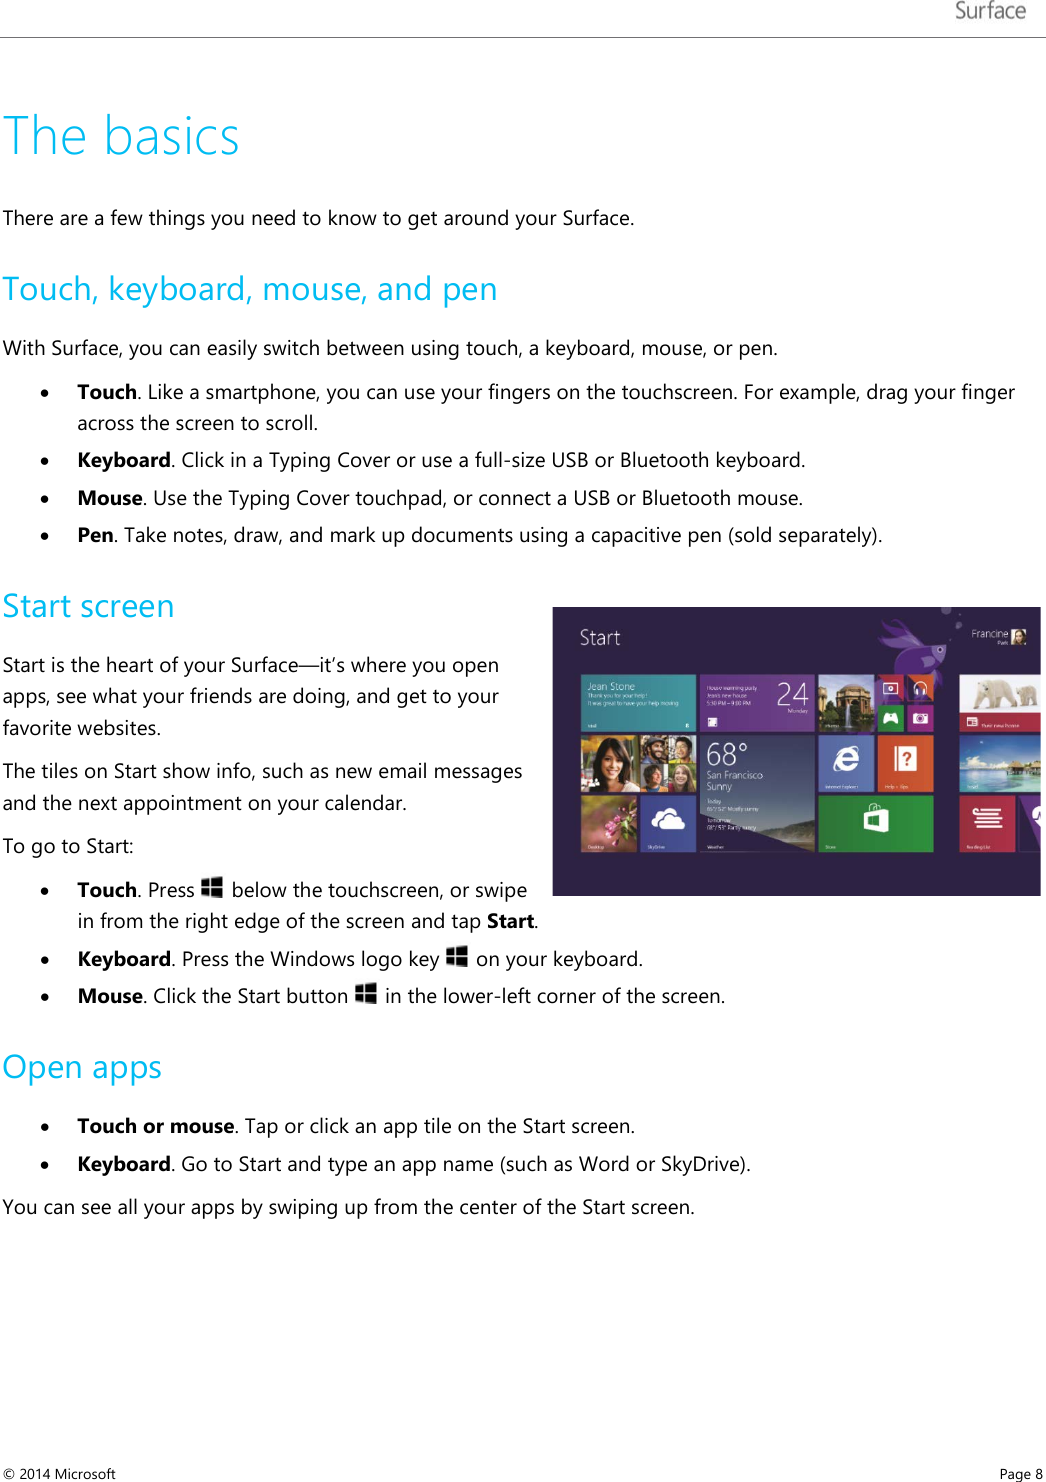   The basics  There are a few things you need to know to get around your Surface.  Touch, keyboard, mouse, and pen  With Surface, you can easily switch between using touch, a keyboard, mouse, or pen.   • Touch. Like a smartphone, you can use your fingers on the touchscreen. For example, drag your finger across the screen to scroll.  • Keyboard. Click in a Typing Cover or use a full-size USB or Bluetooth keyboard.   • Mouse. Use the Typing Cover touchpad, or connect a USB or Bluetooth mouse.   • Pen. Take notes, draw, and mark up documents using a capacitive pen (sold separately). Start screen Start is the heart of your Surface—it’s where you open apps, see what your friends are doing, and get to your favorite websites.  The tiles on Start show info, such as new email messages and the next appointment on your calendar.   To go to Start: • Touch. Press   below the touchscreen, or swipe in from the right edge of the screen and tap Start. • Keyboard. Press the Windows logo key   on your keyboard.  • Mouse. Click the Start button   in the lower-left corner of the screen. Open apps • Touch or mouse. Tap or click an app tile on the Start screen.   • Keyboard. Go to Start and type an app name (such as Word or SkyDrive). You can see all your apps by swiping up from the center of the Start screen. © 2014 Microsoft     Page 8  